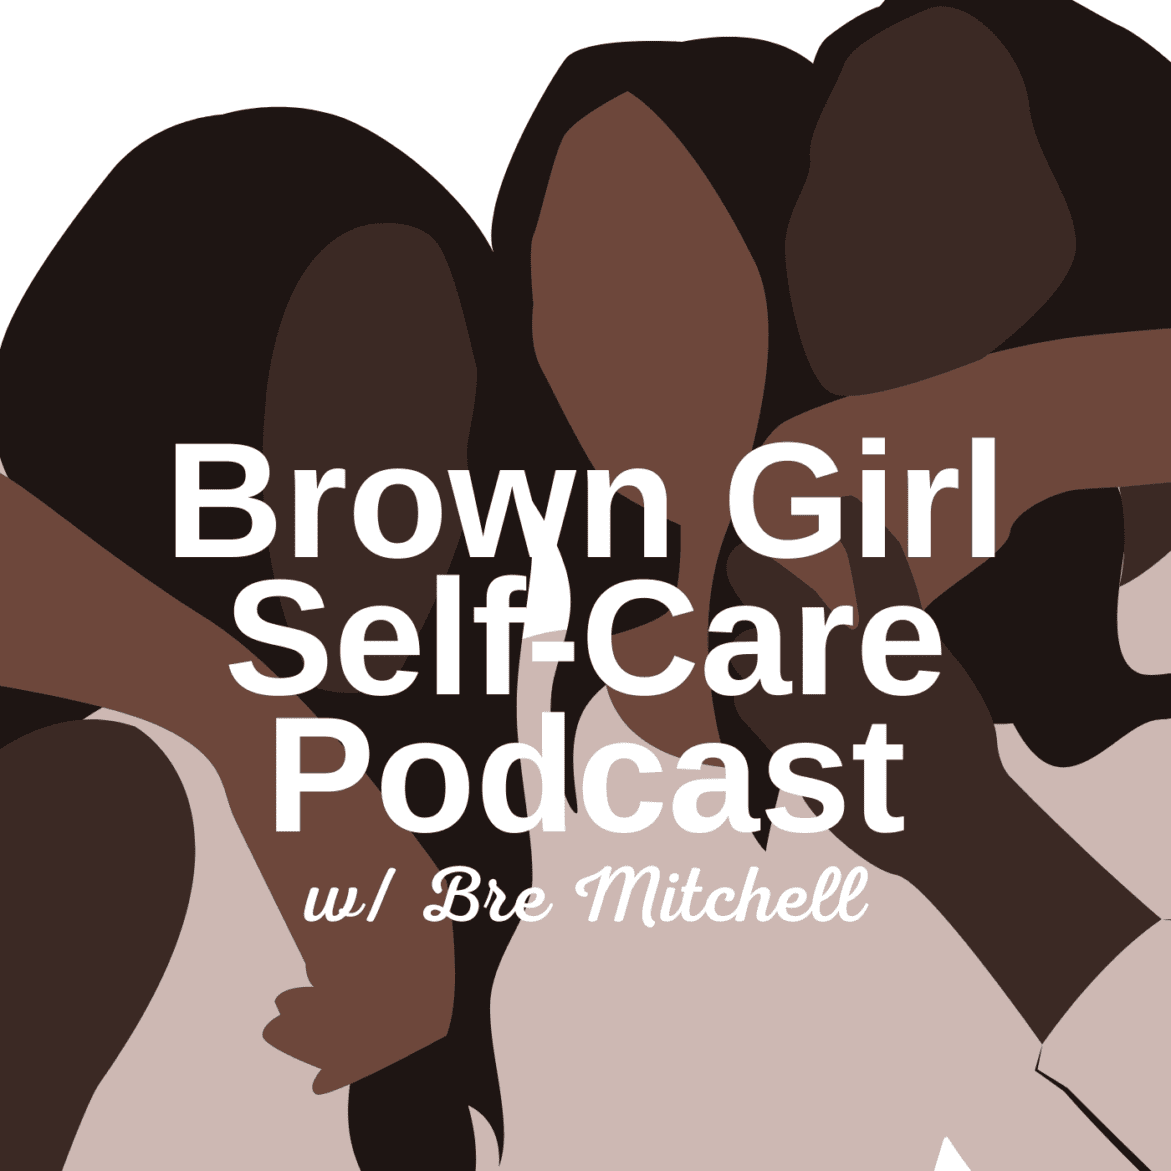 Black Podcasting - You Aren't Superwoman And You Don't Have To Be: Community Care